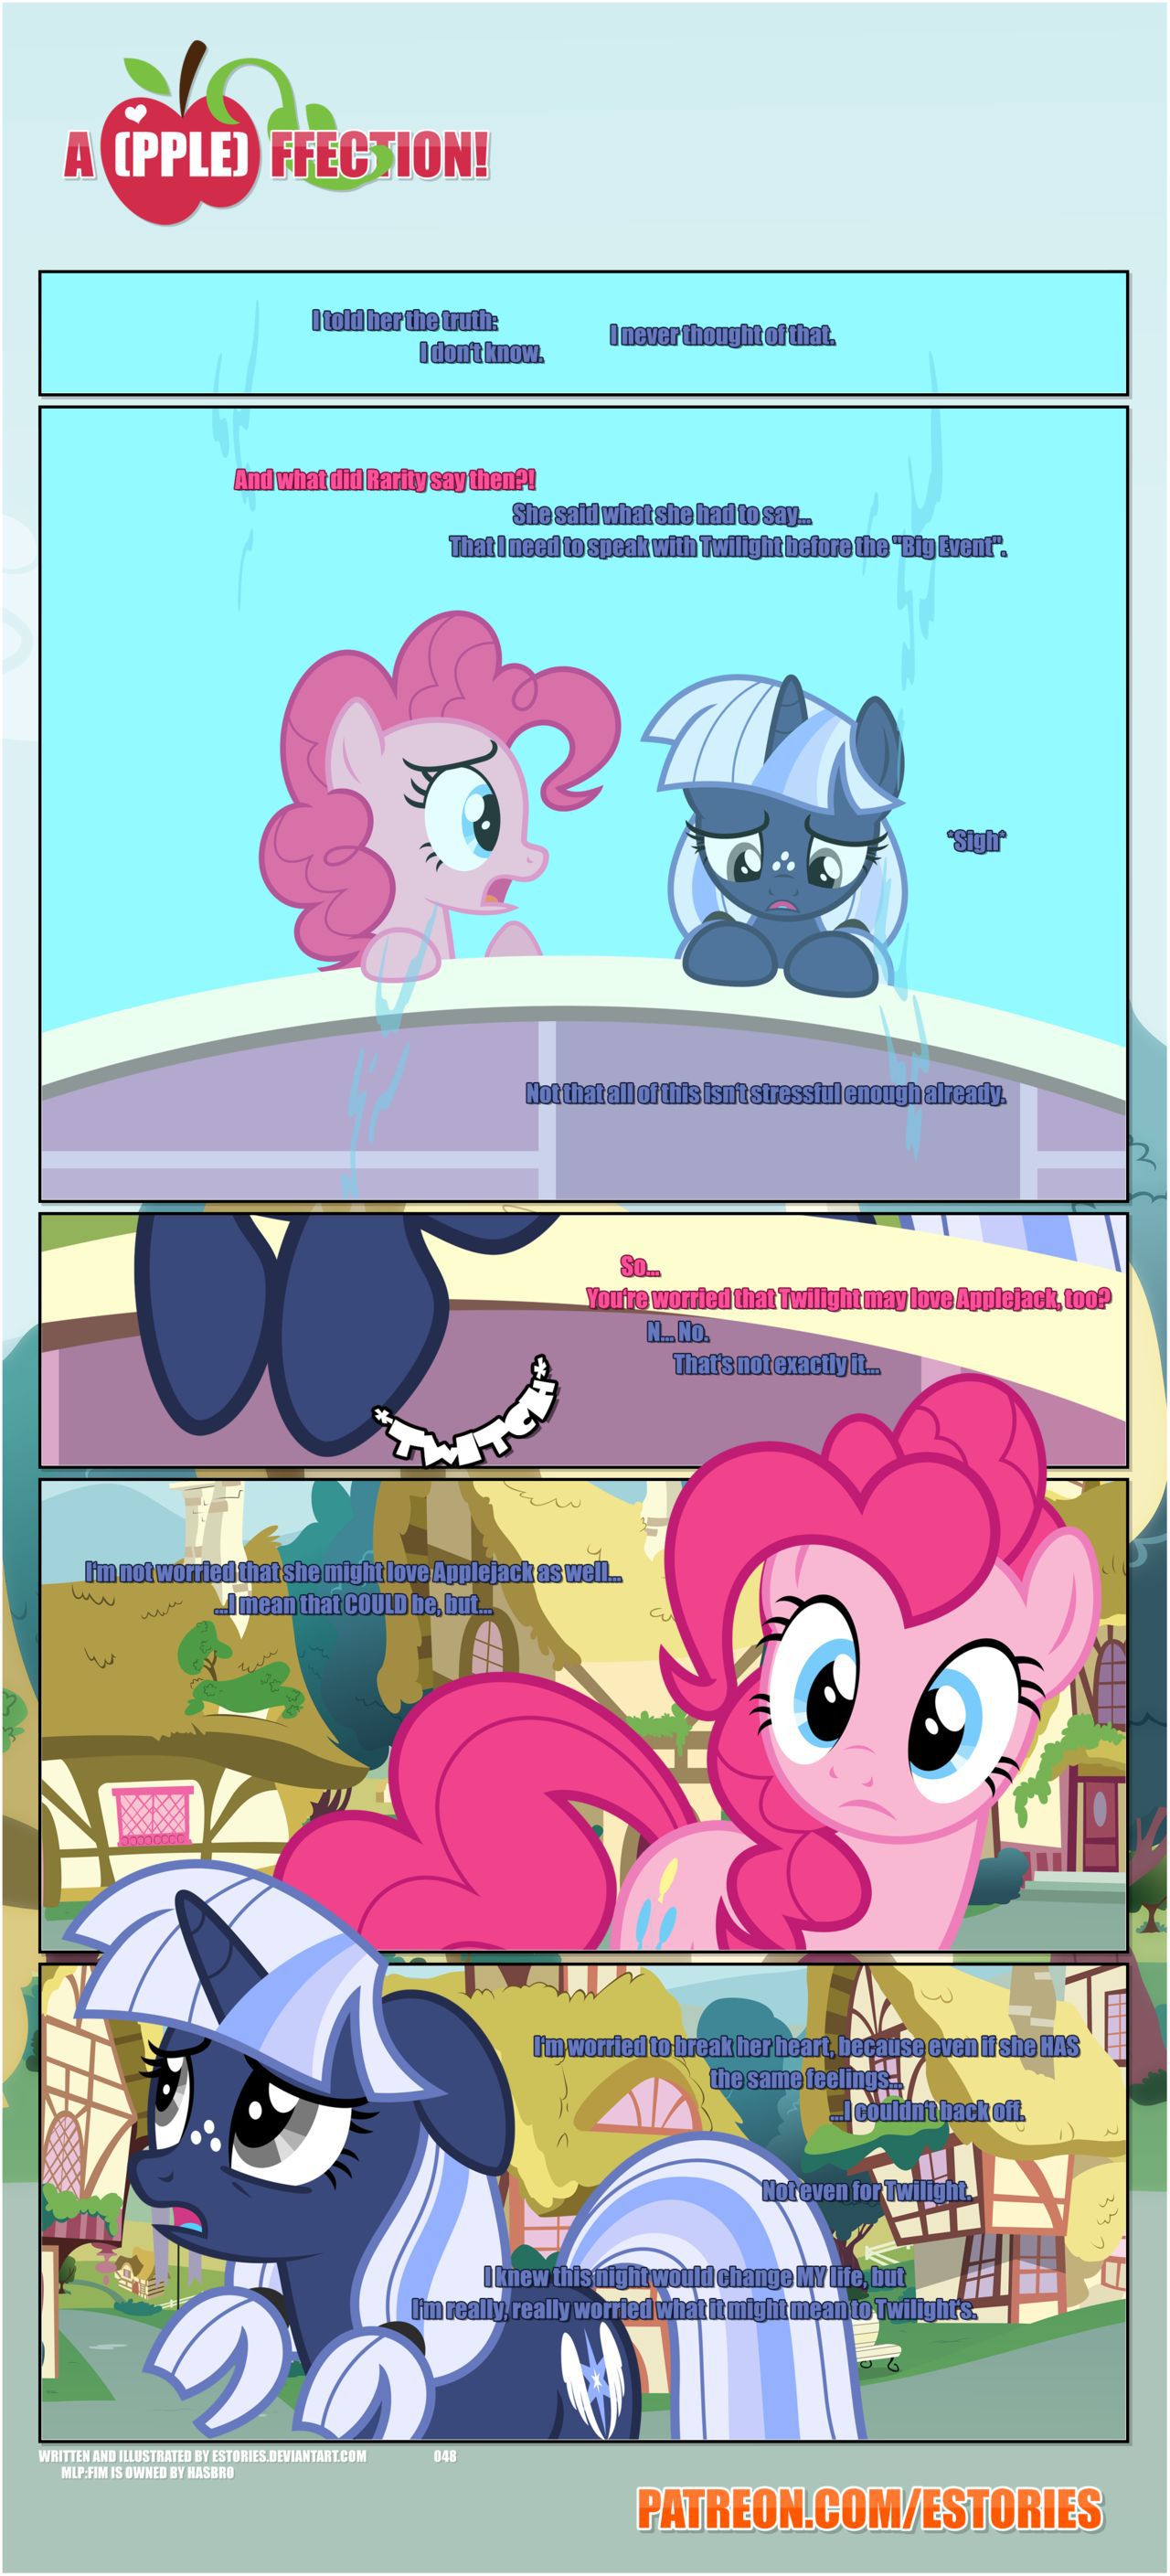 [EStories] Appleffection (My Little Pony Friendship is Magic) [Ongoing] 49